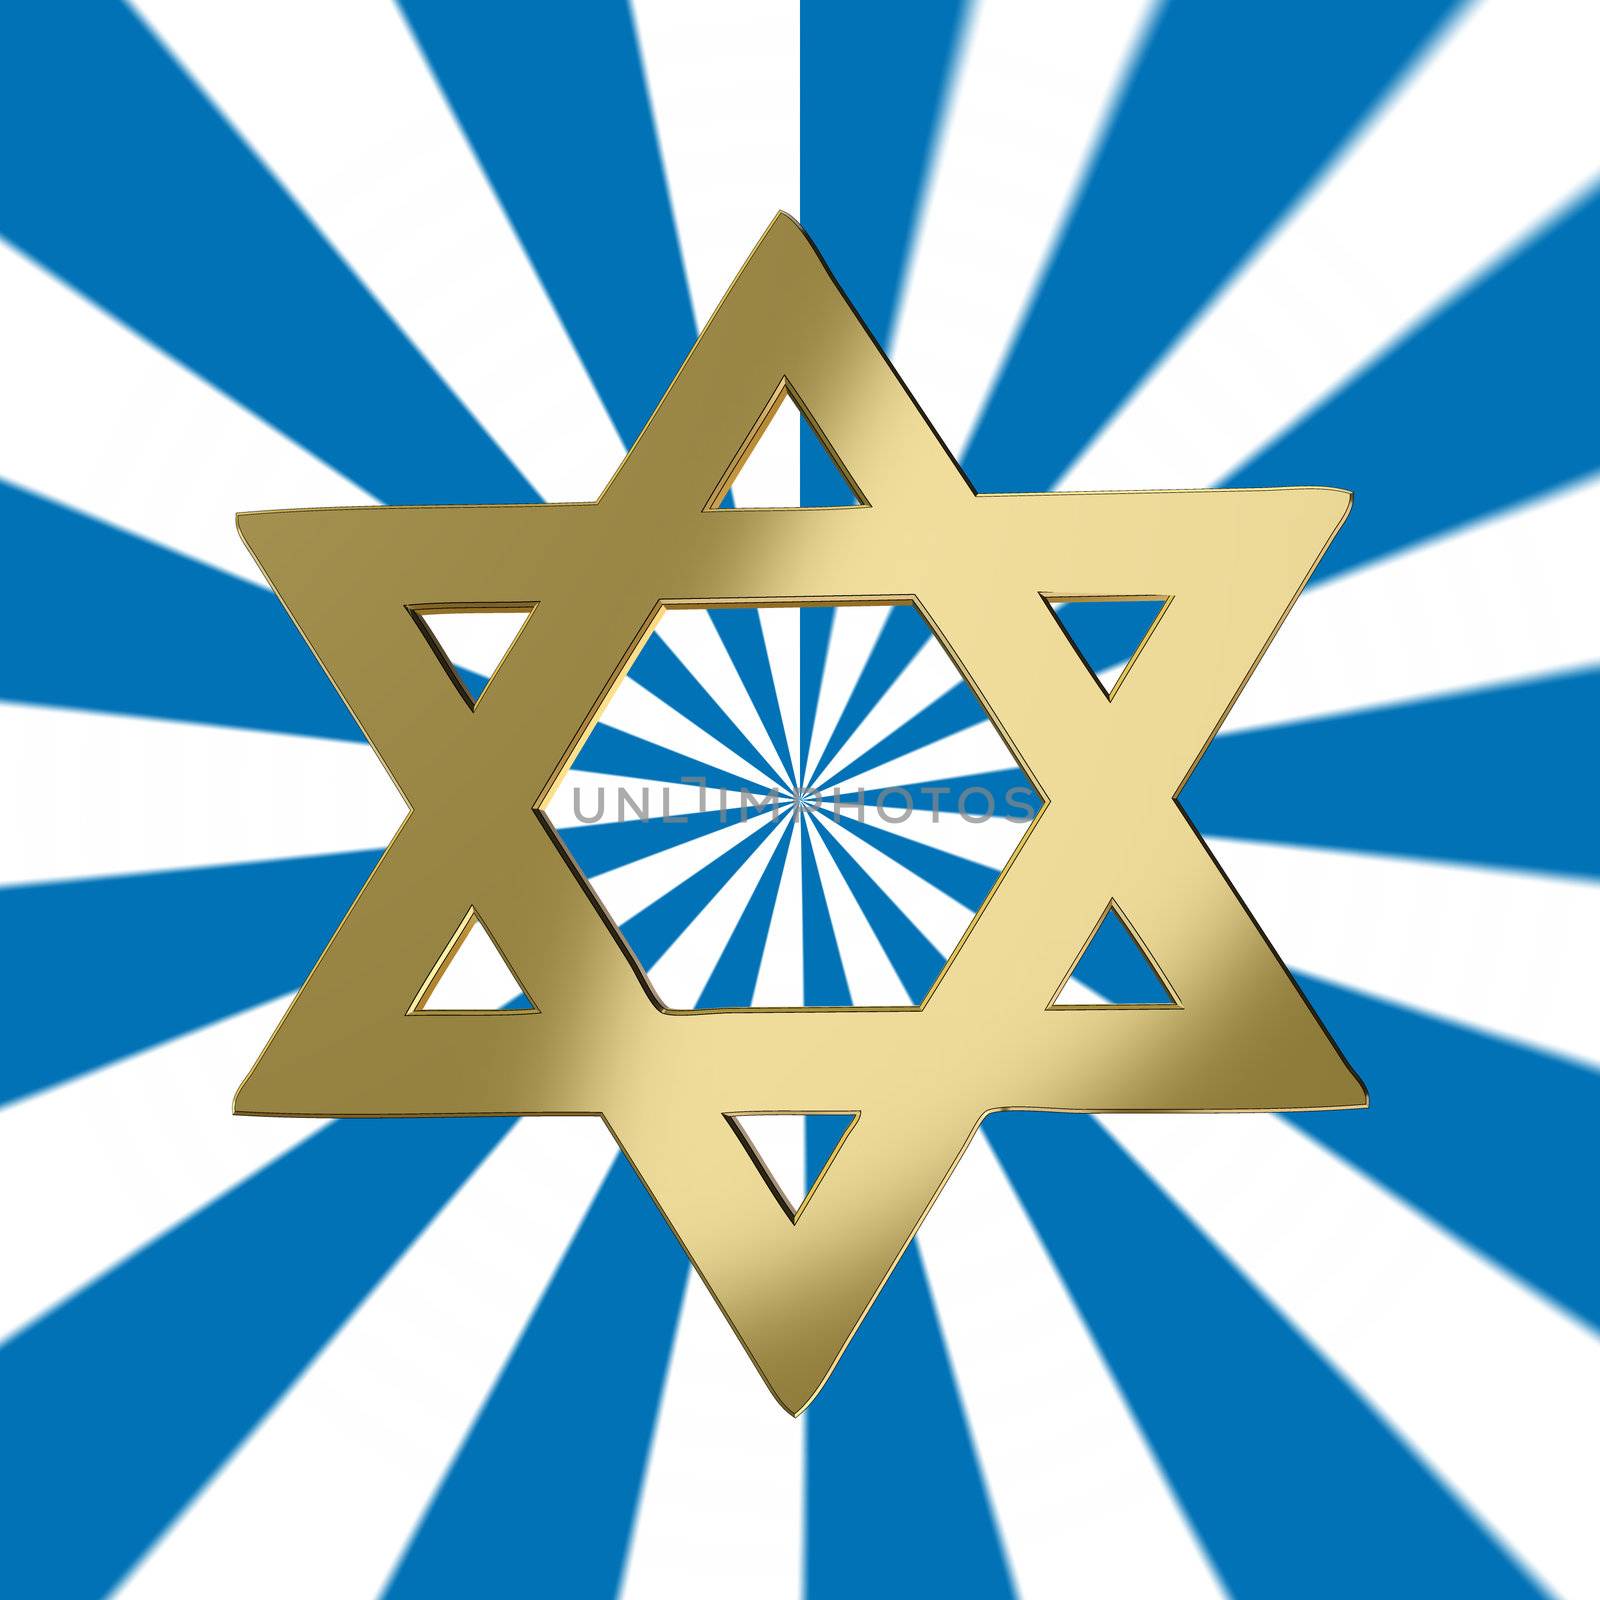 Star of David with a starburst background by nadil